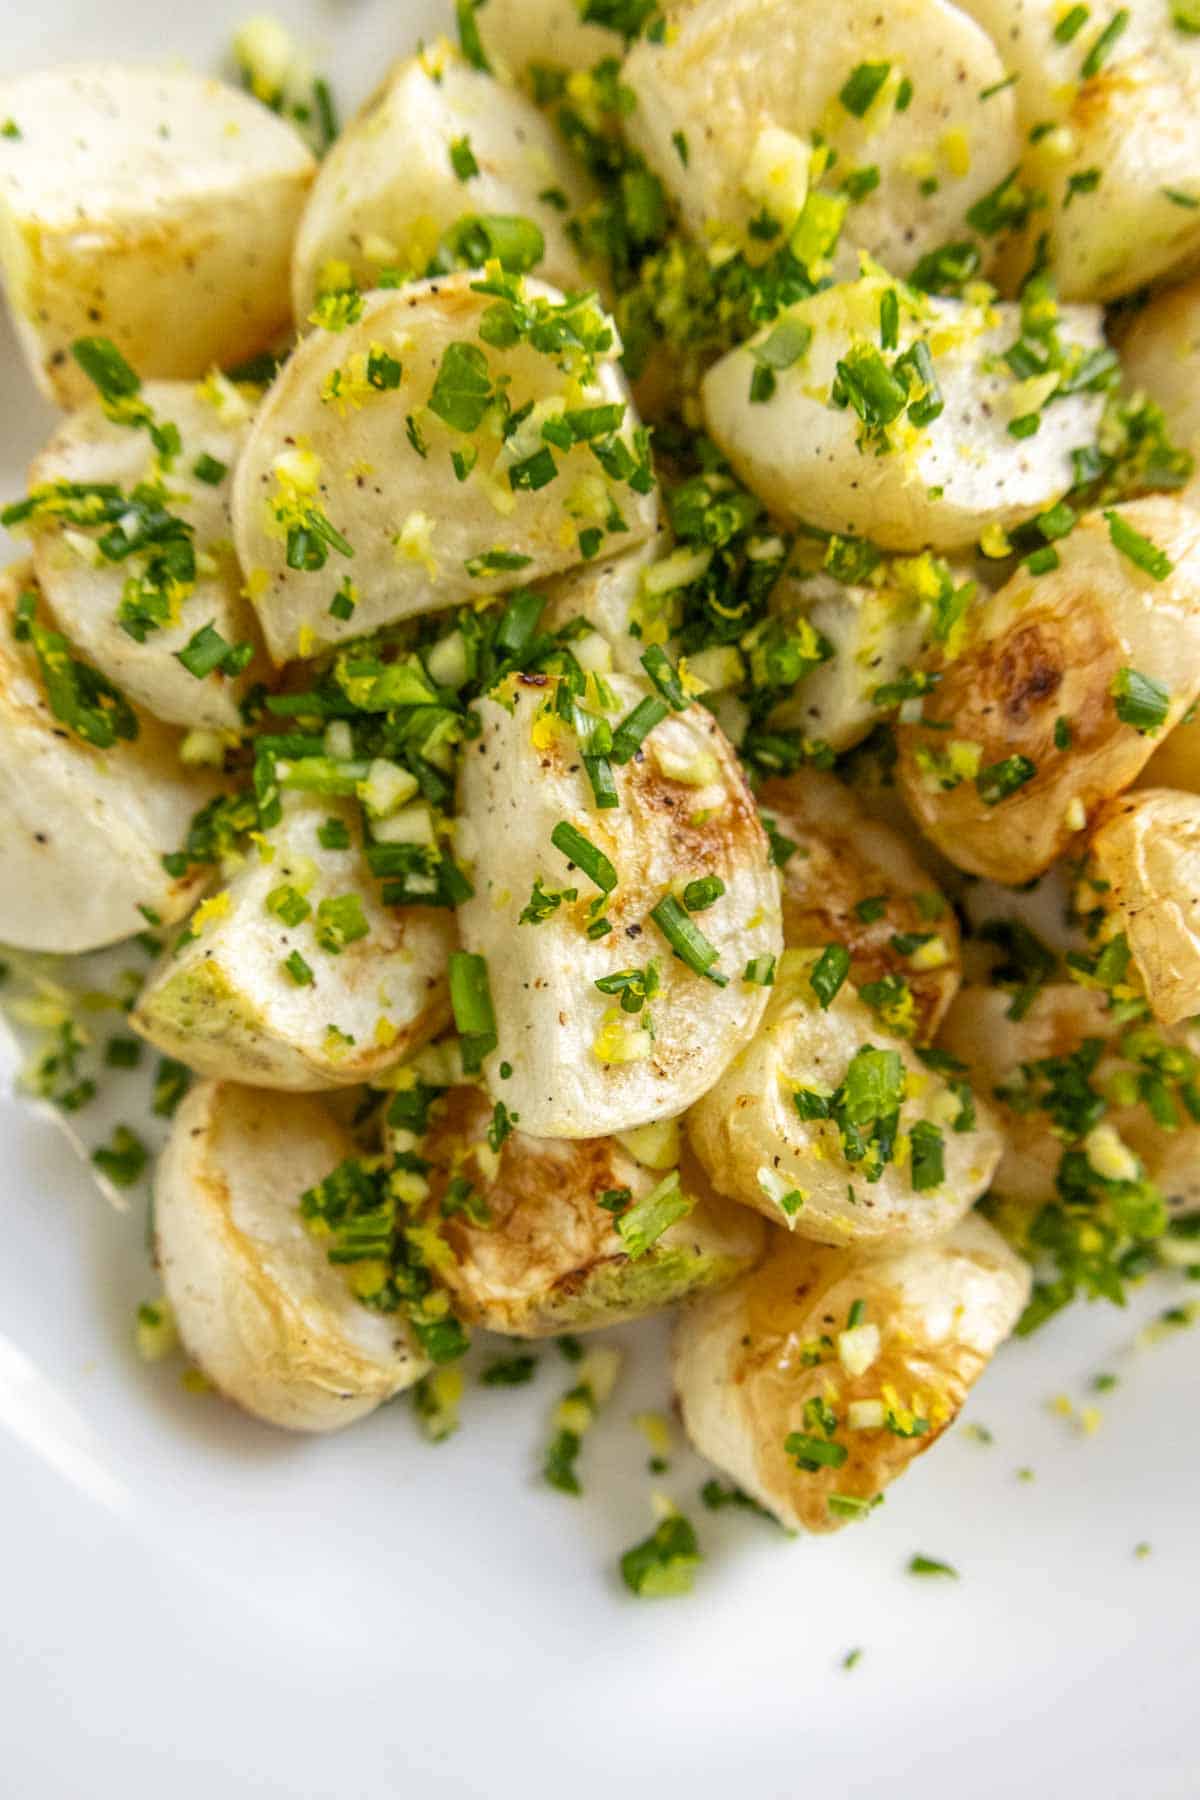 Close-up of roasted diced potatoes garnished with finely chopped herbs, served on a white plate.